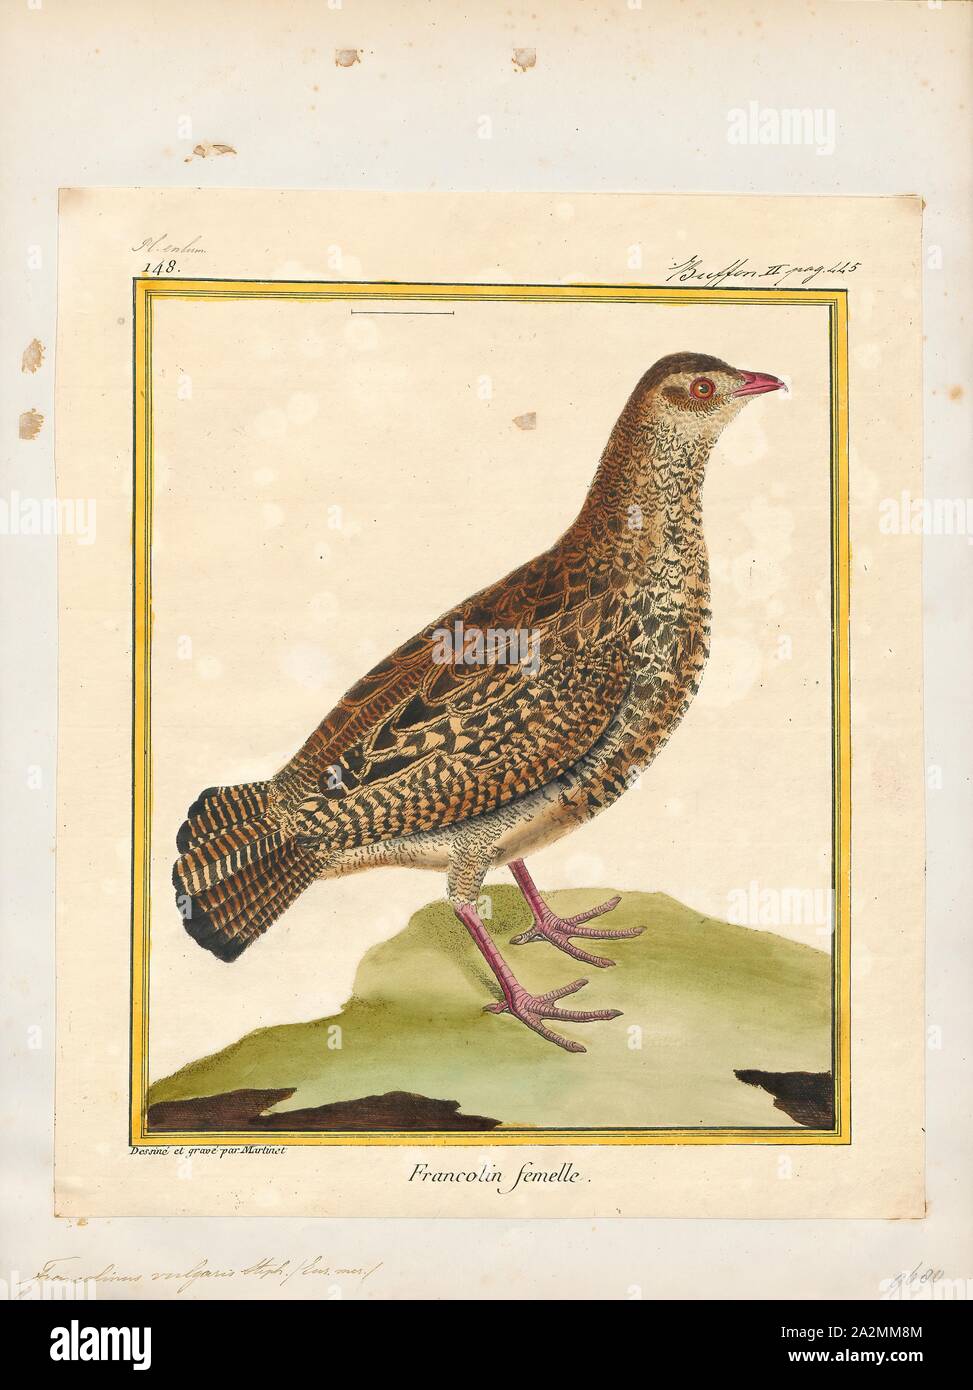 Francolinus vulgaris, Print, Francolinus is a genus of birds in the francolin group of the partridge subfamily of the pheasant family. Its five species range from western Asia and central Asia through to southern Asia and south-eastern Asia., 1700-1880 Stock Photo